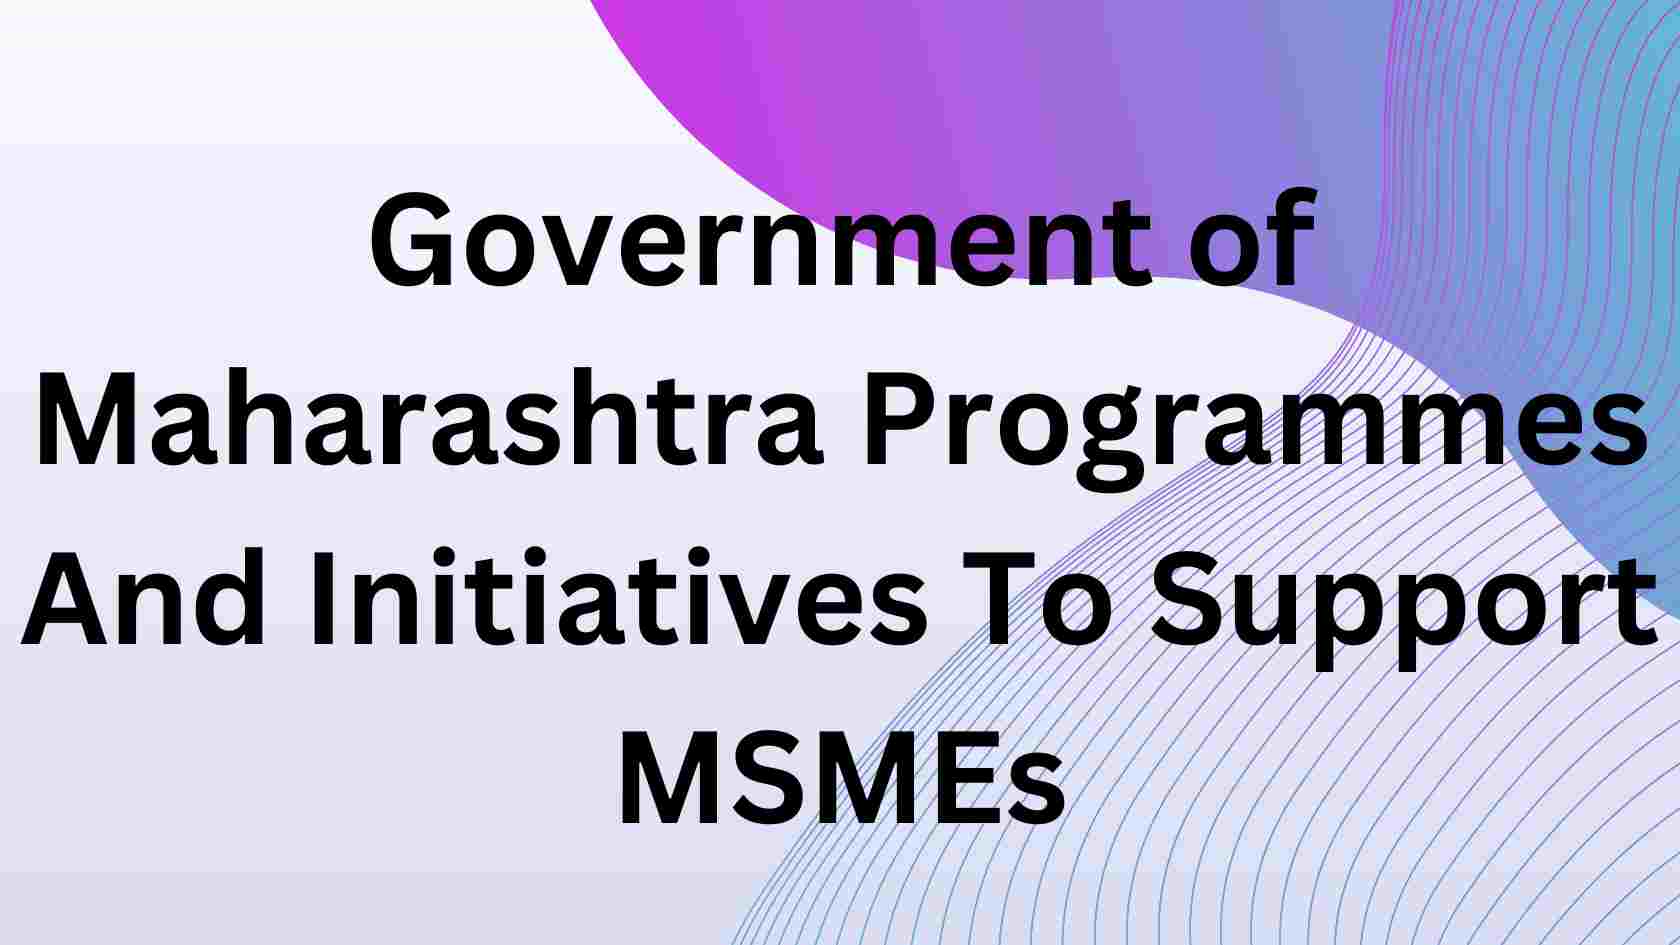 Government of Maharashtra Programmes to Support MSMEs